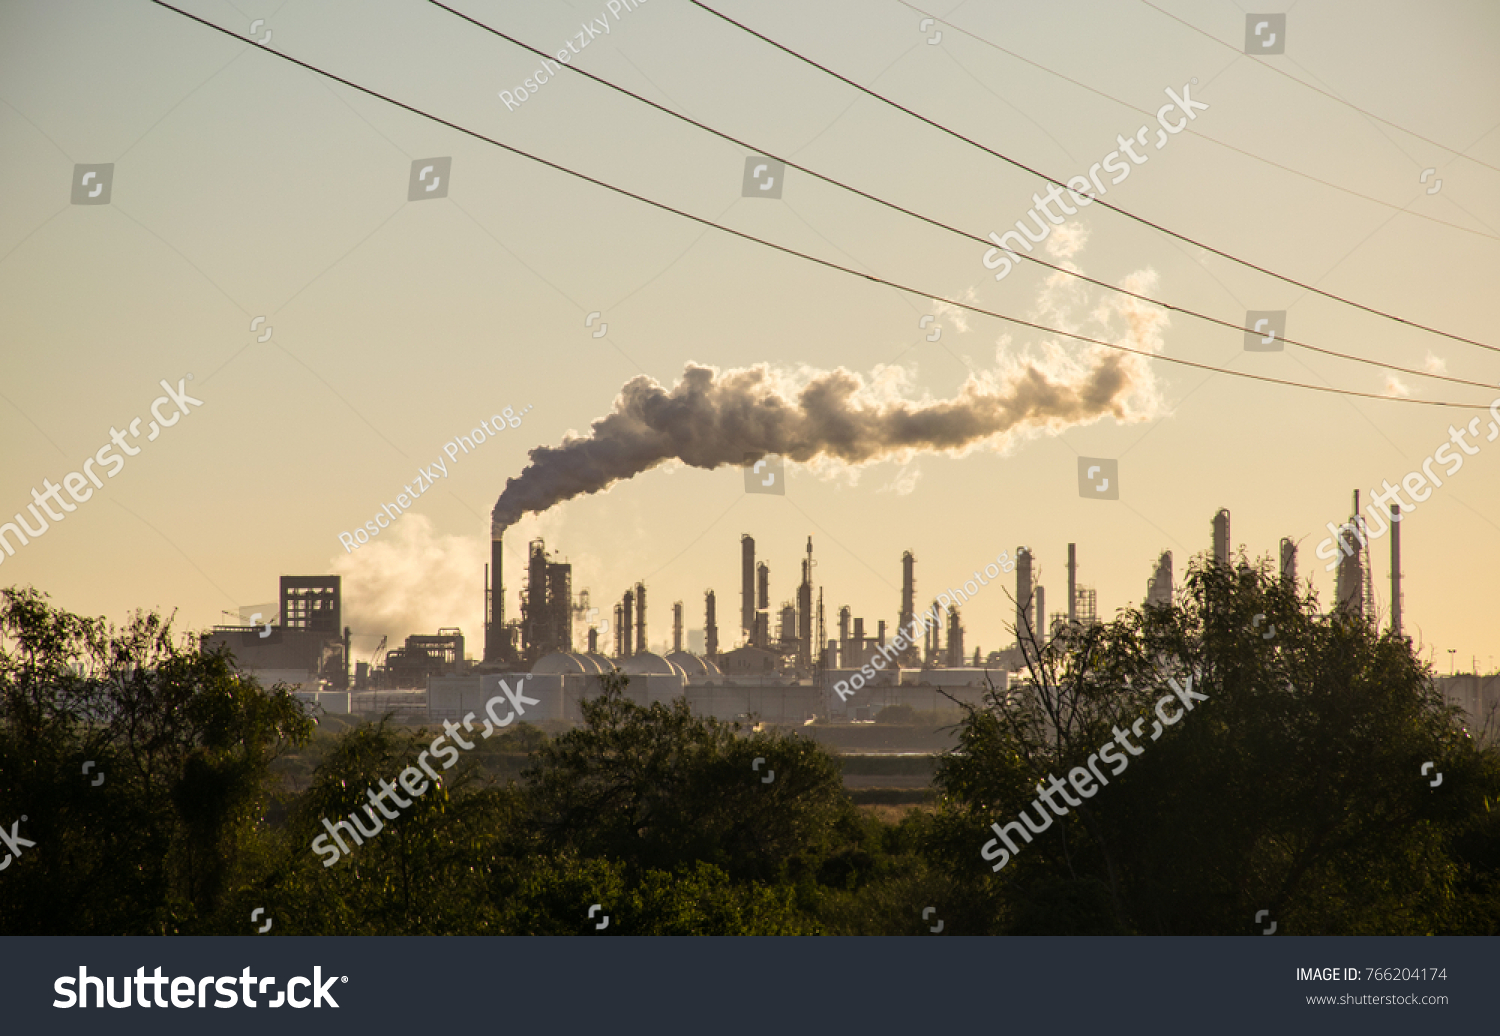 Oil refineries polluting carbon and cancer causing smoke stacks climate change and power plants in Corpus Christi , Texas a massive large refinery #766204174